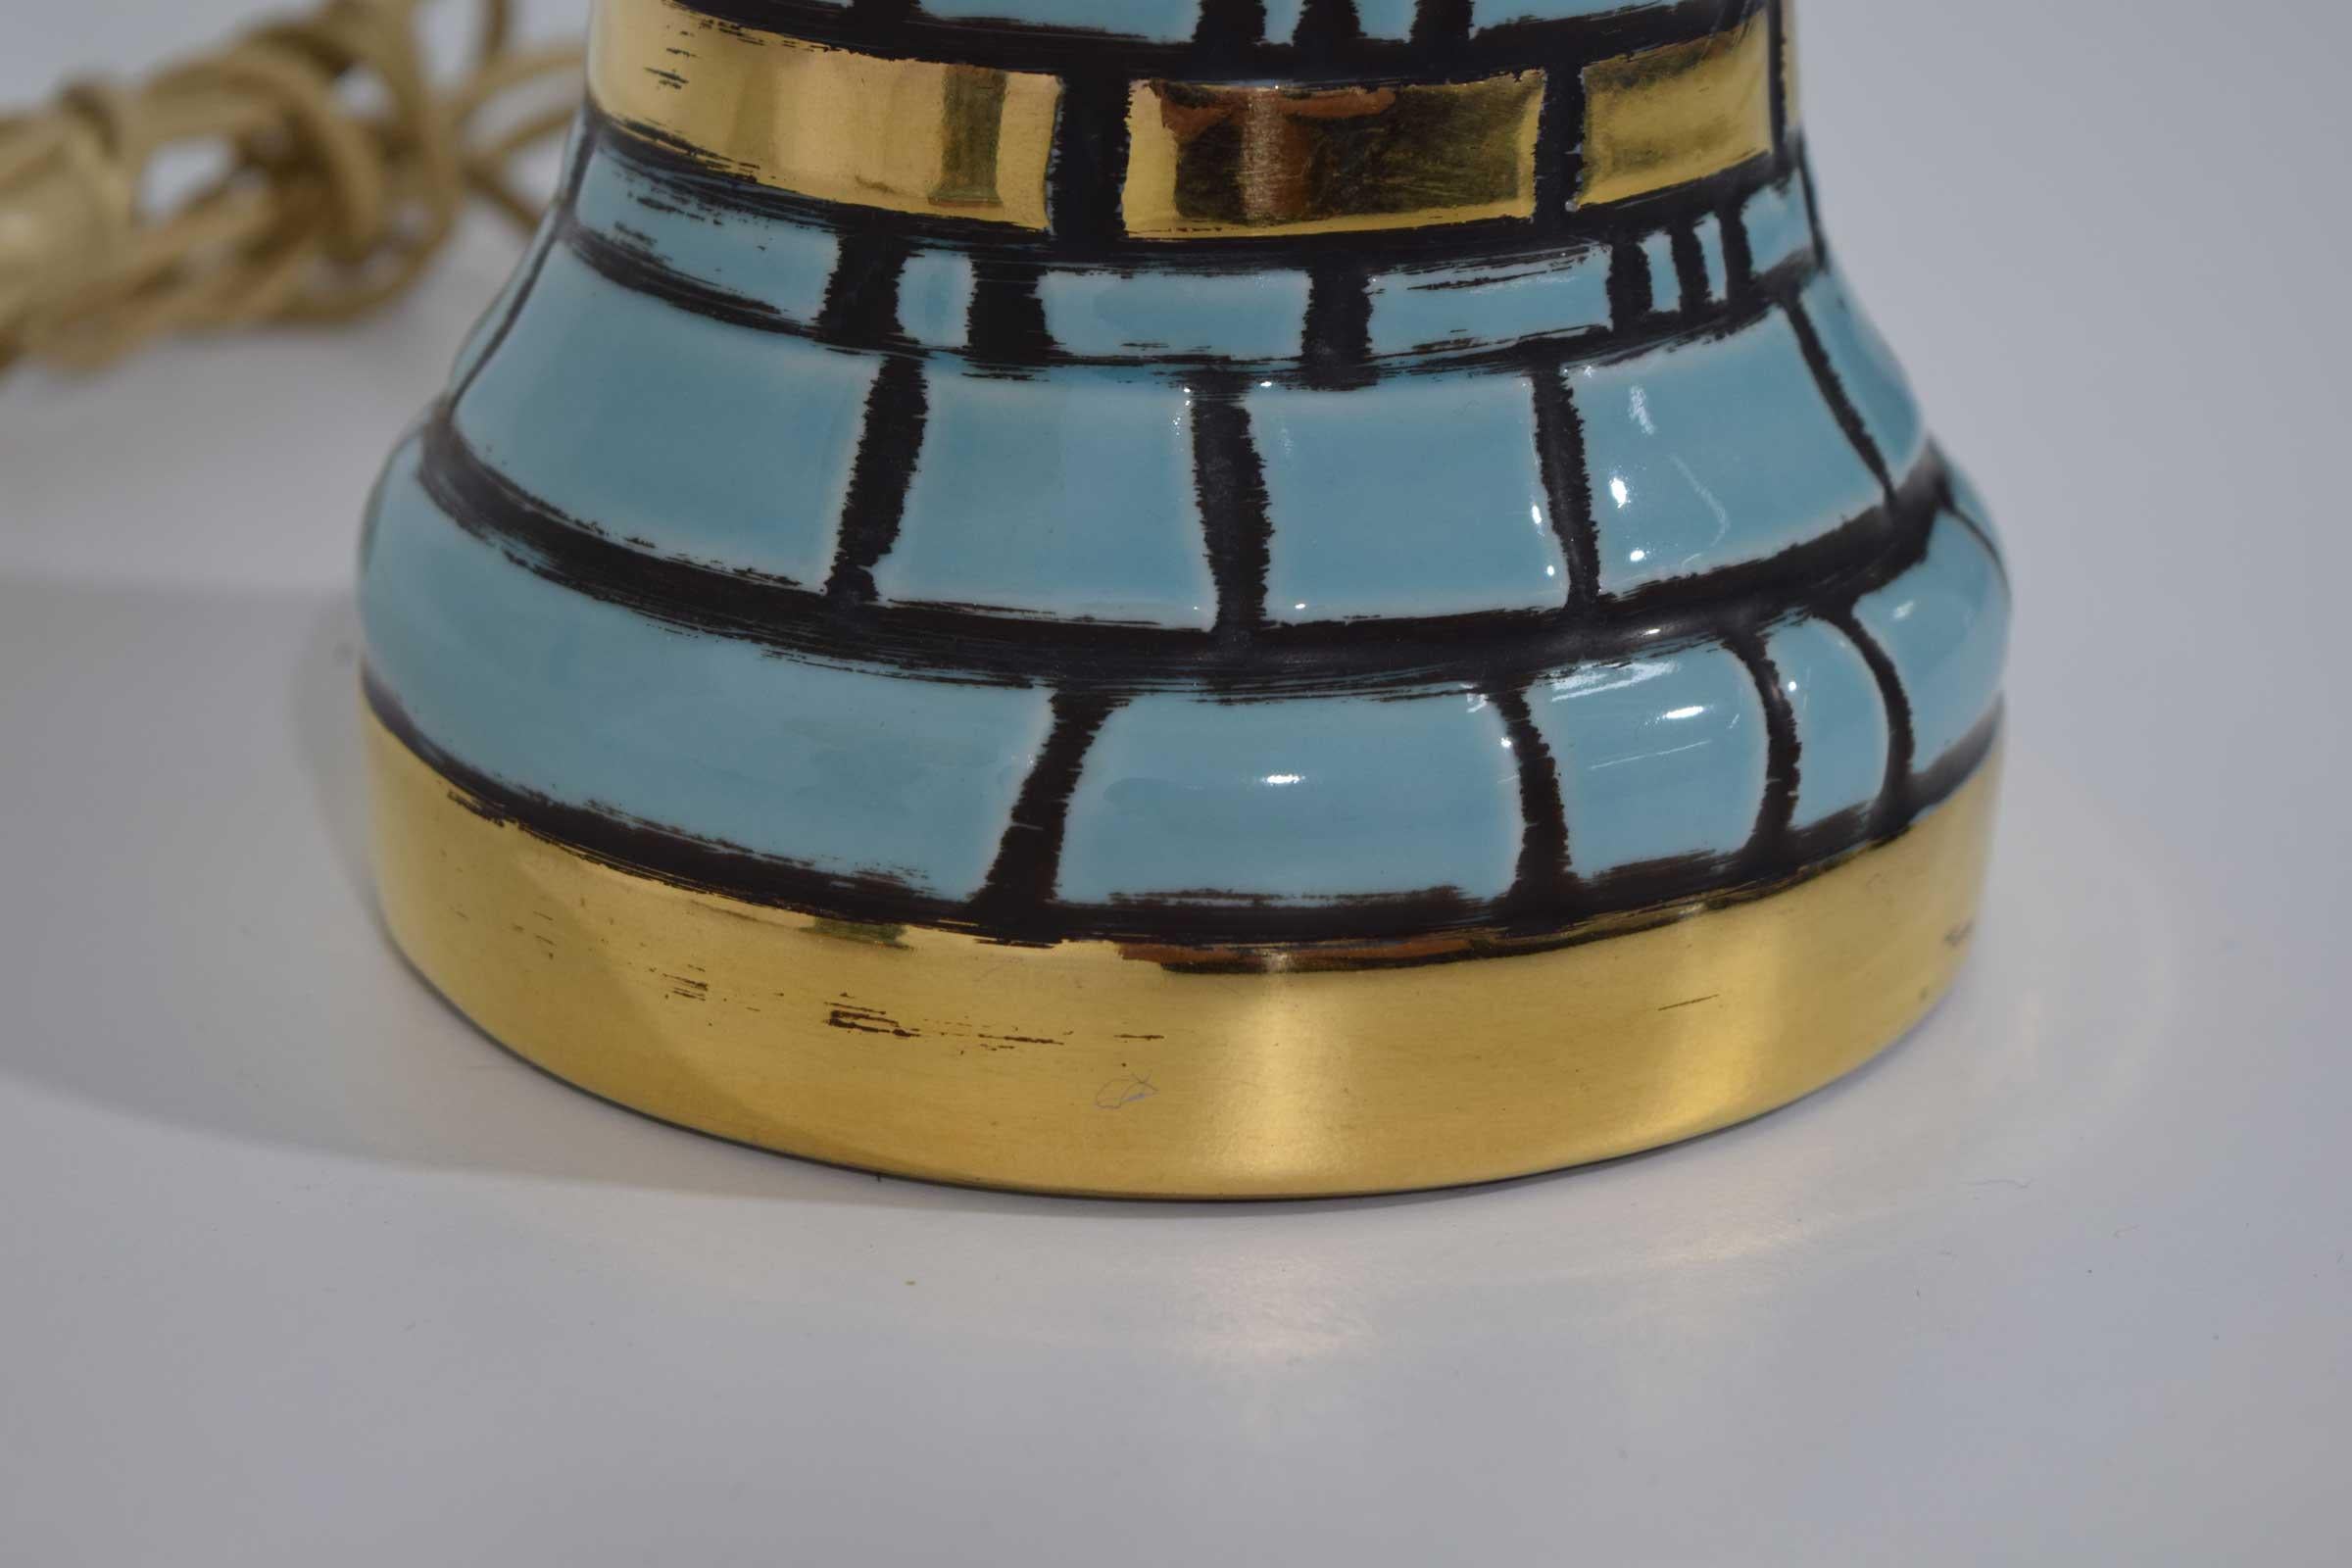 American Midcentury Ceramic Tiled Lamps in Turquoise and Gold